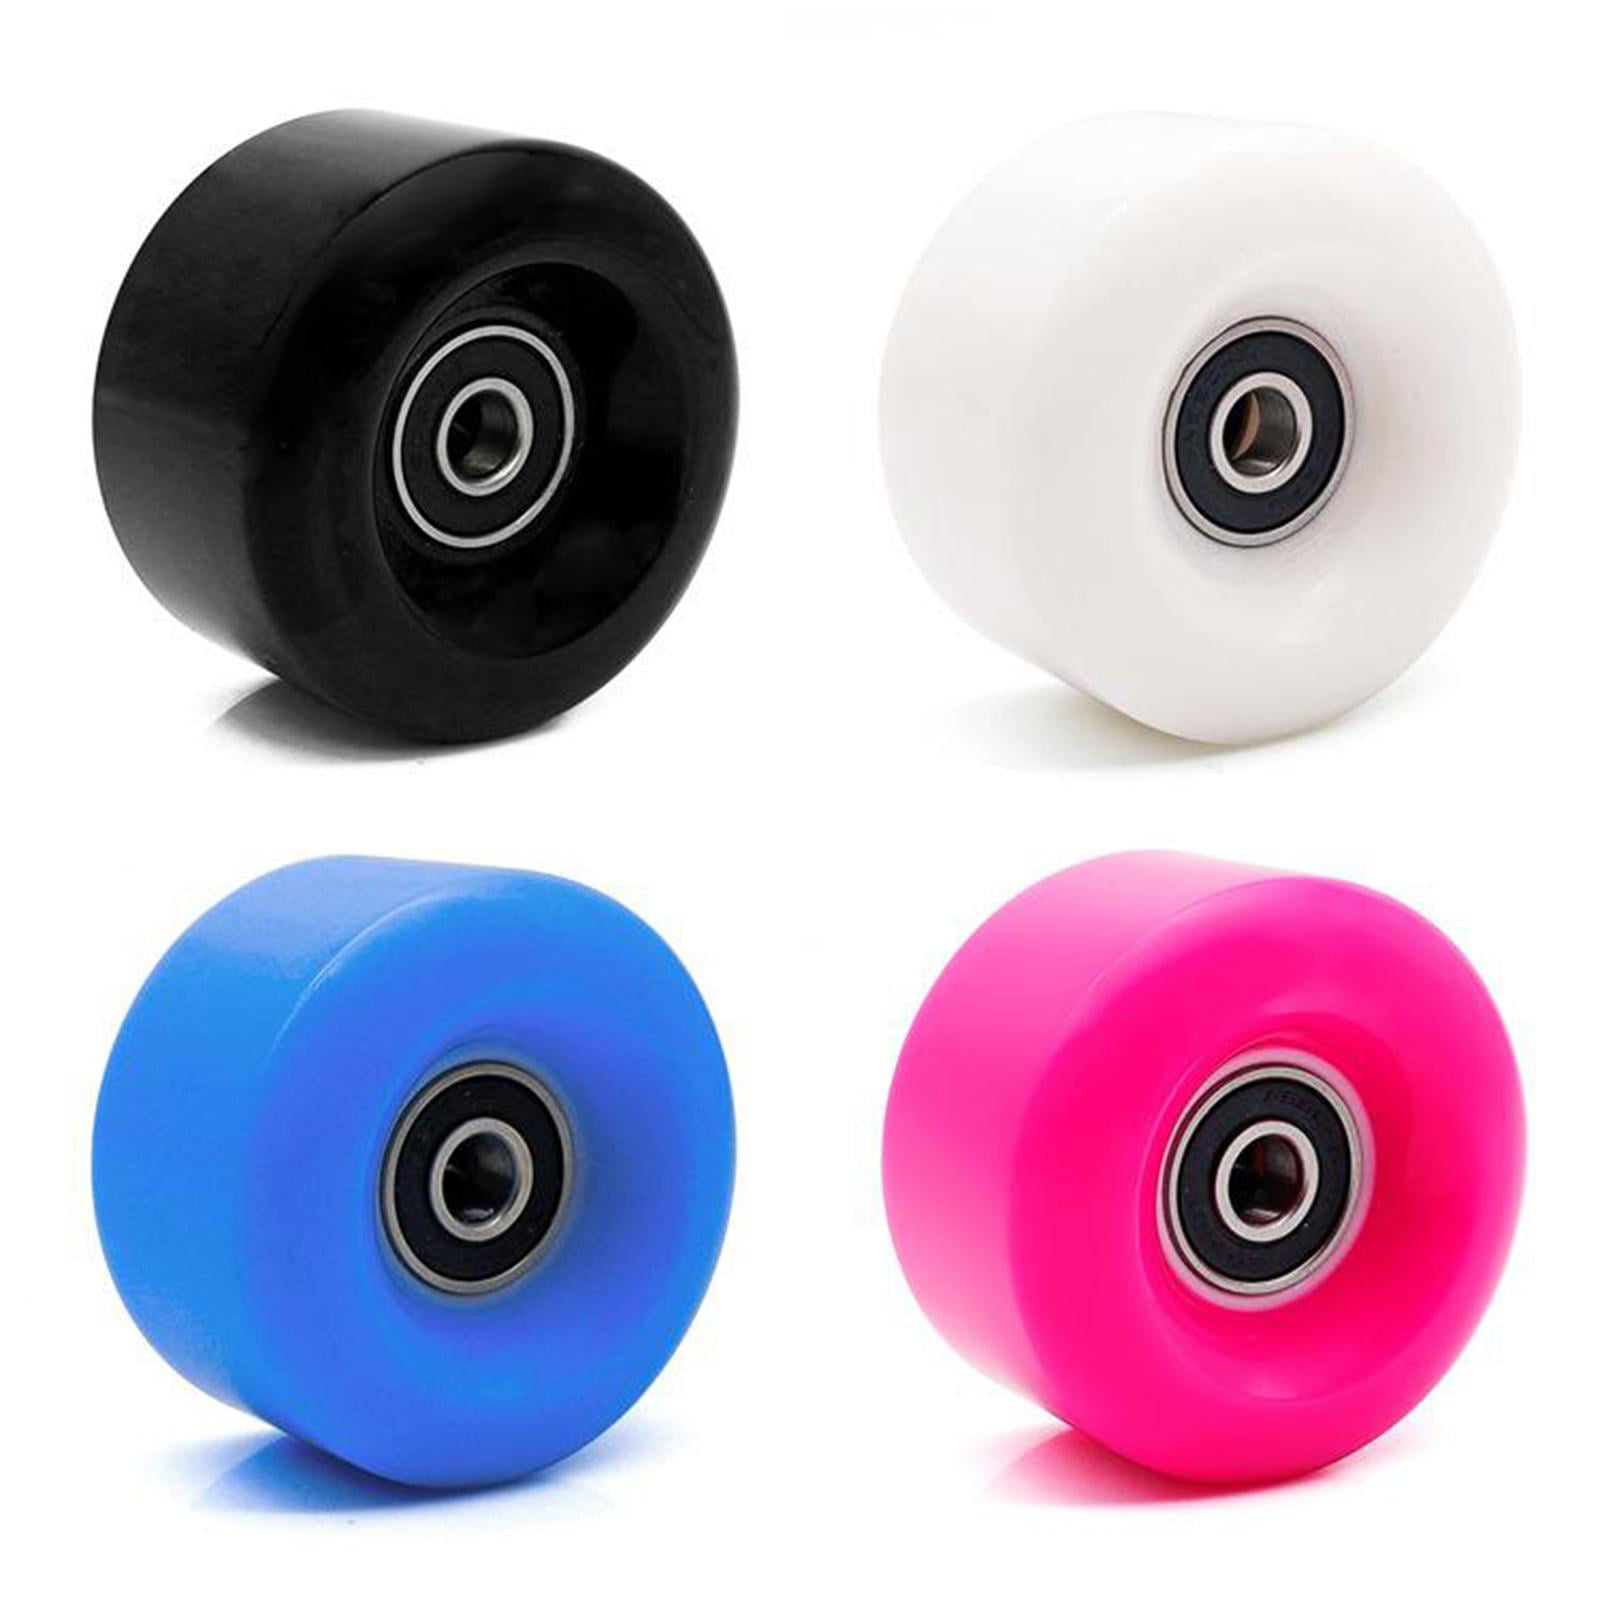 Sretanj 4 Pack 82A Roller Skate Wheels Outdoor，Luminous Wheels with Bearings are Suitable for Light Wheels for Double-Row Skating and Skateboards 58mm x 32mm Skateboard Accessories 